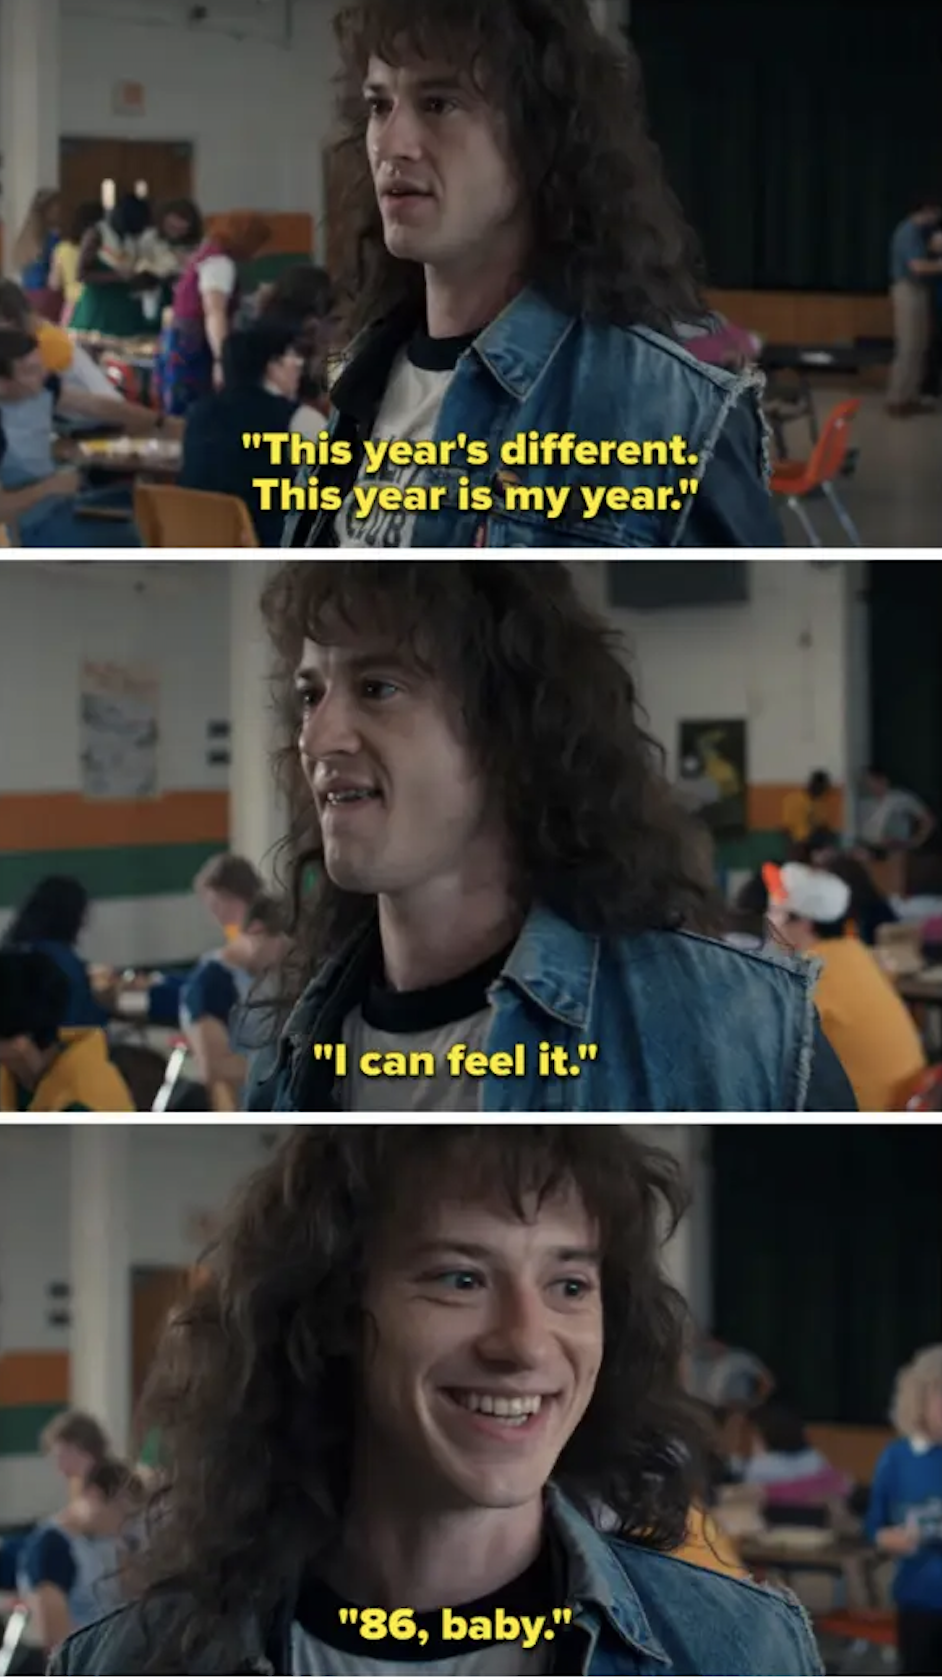 long-haired teen saying this year is different